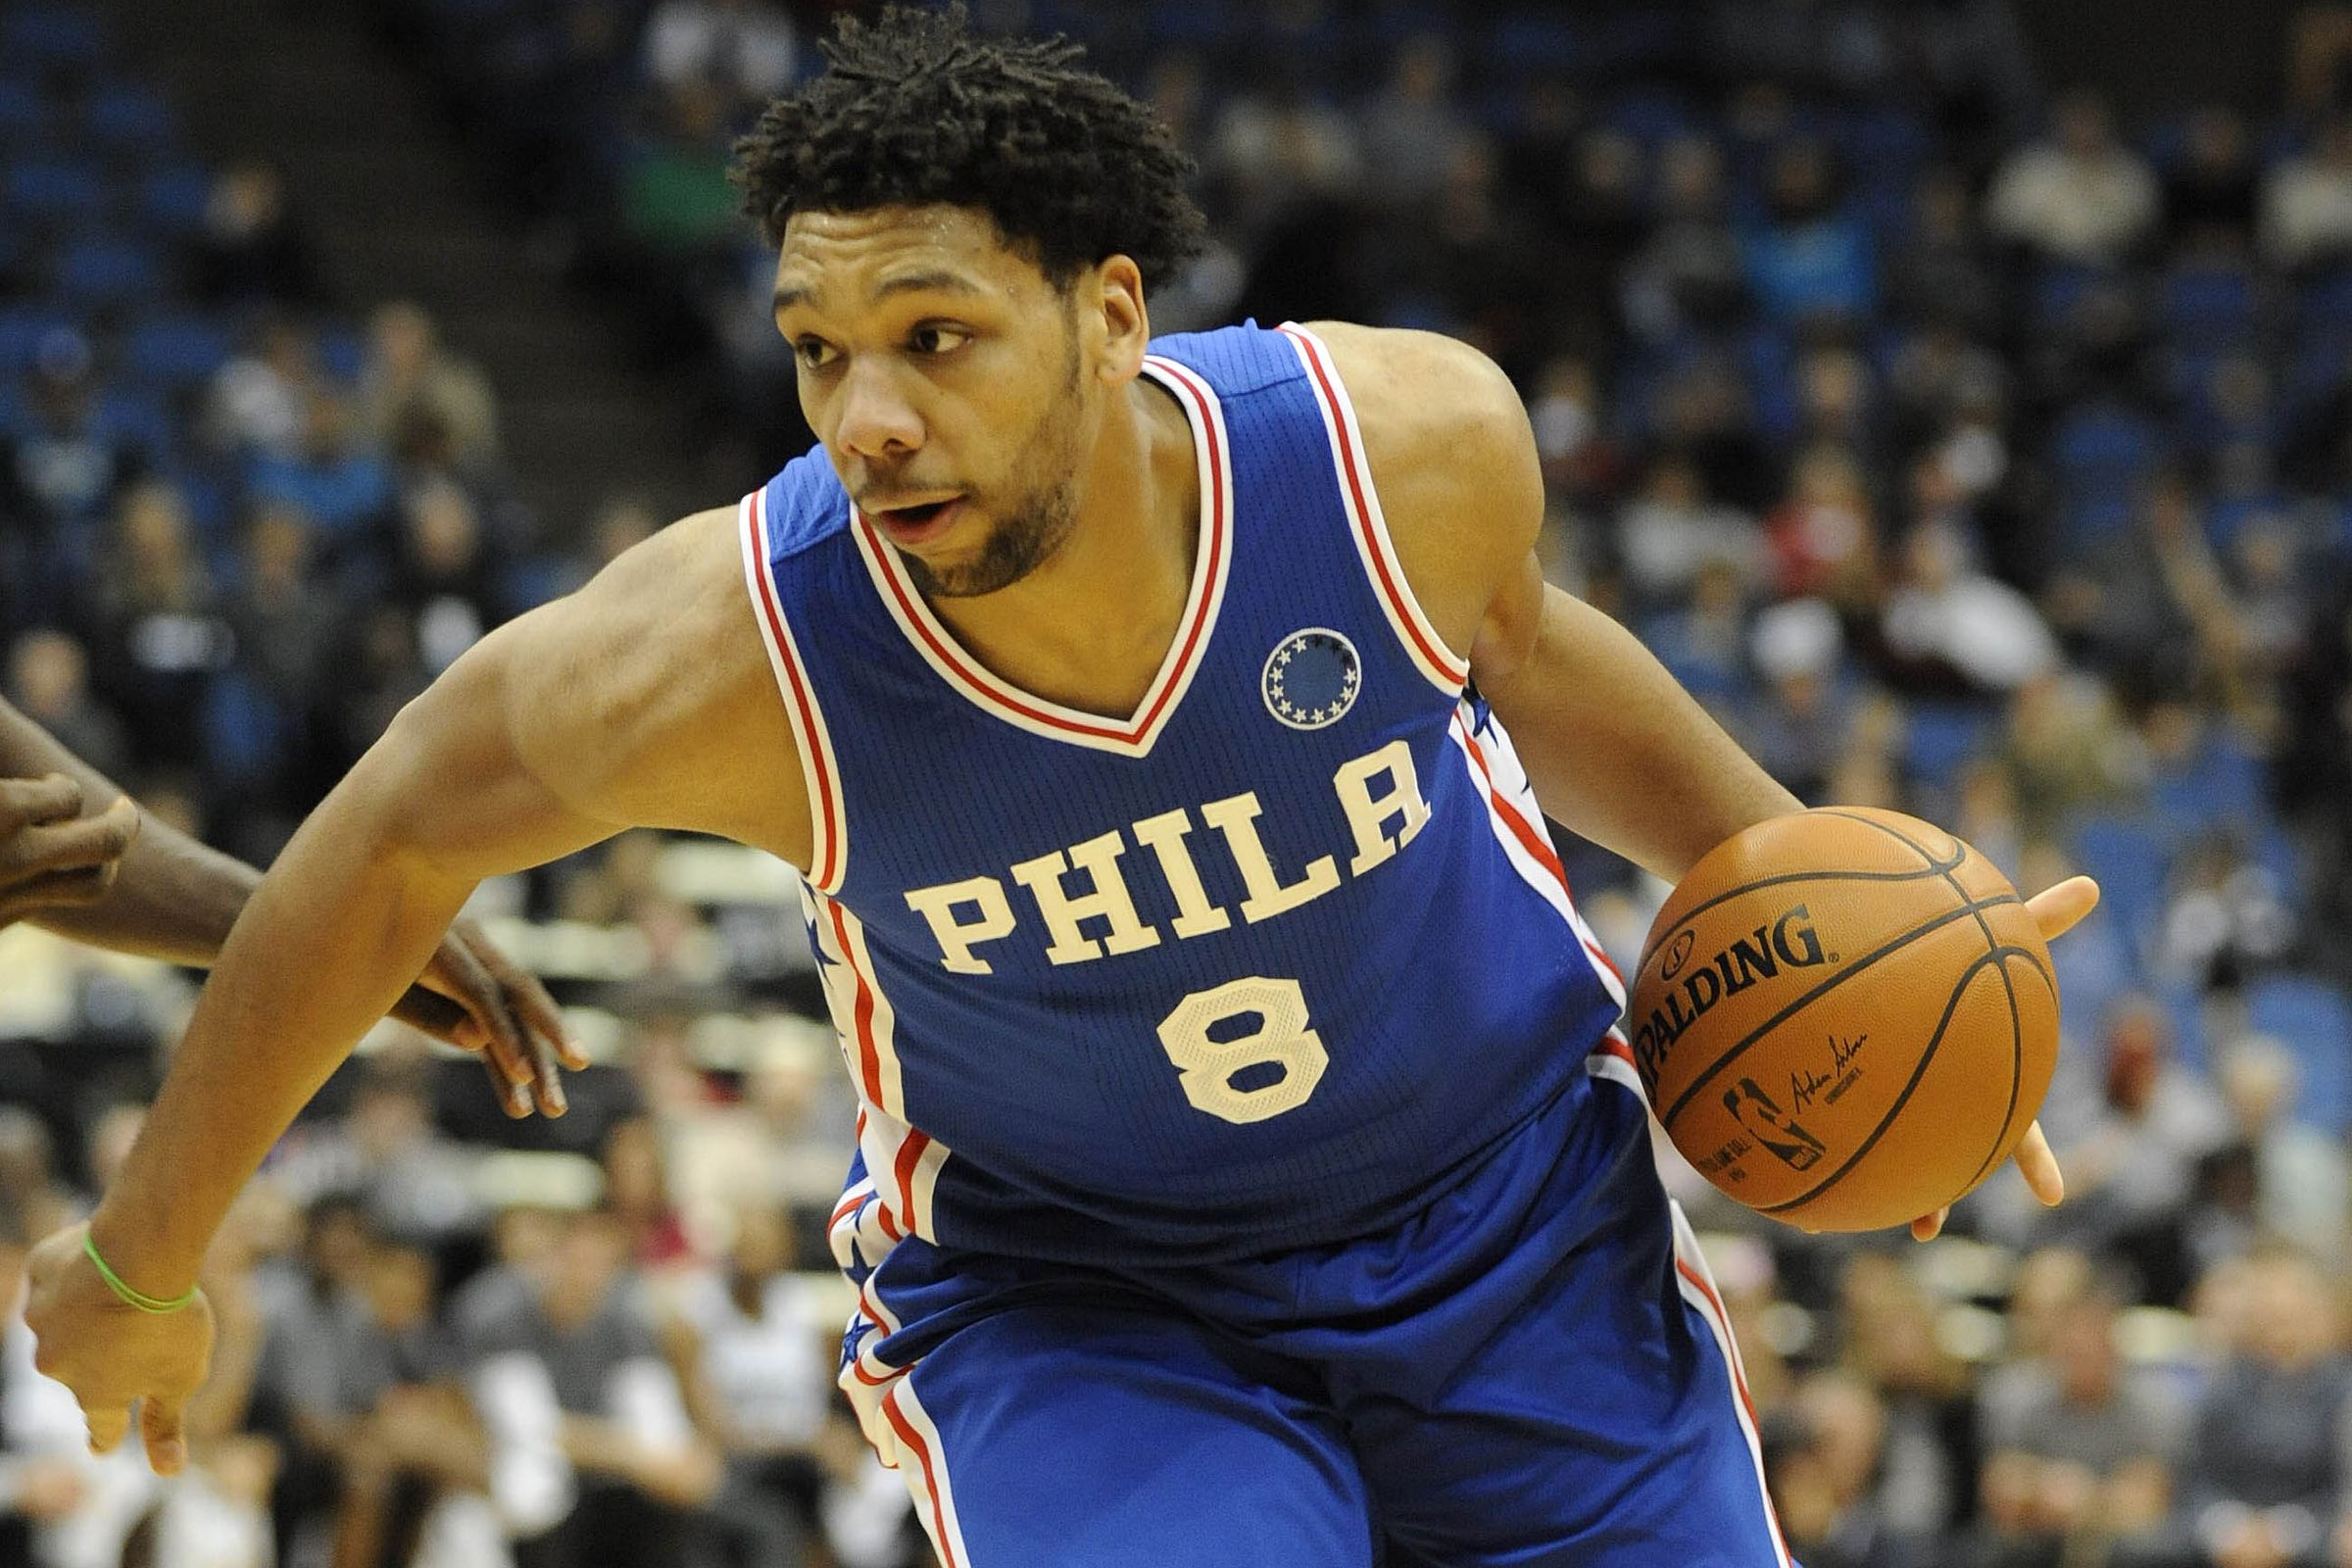 Sixers’ Jahlil Okafor knocks out Boston heckler in newly-released video